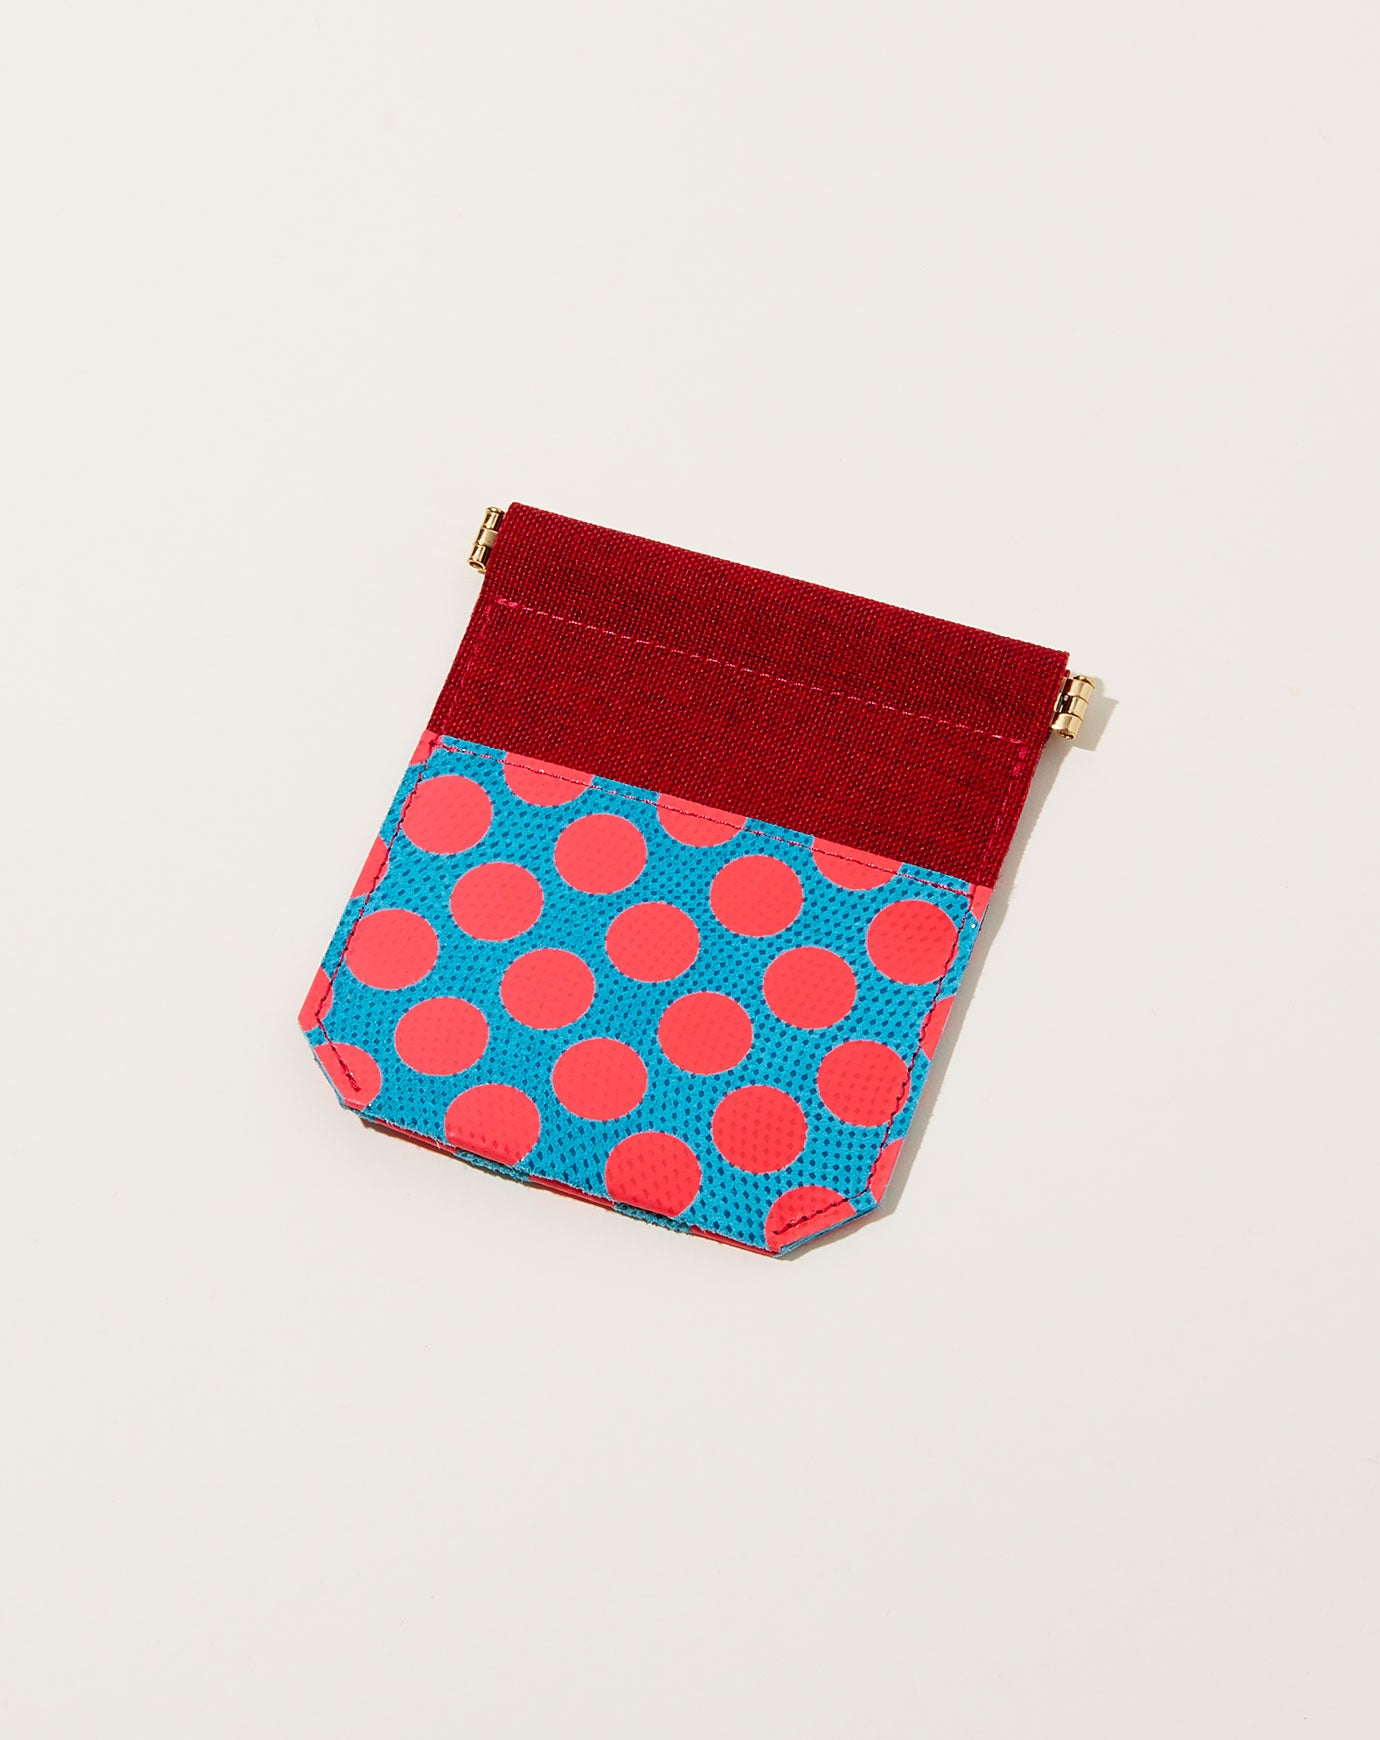 Carmine Ecology Leather Mini Pouch in Neon Red